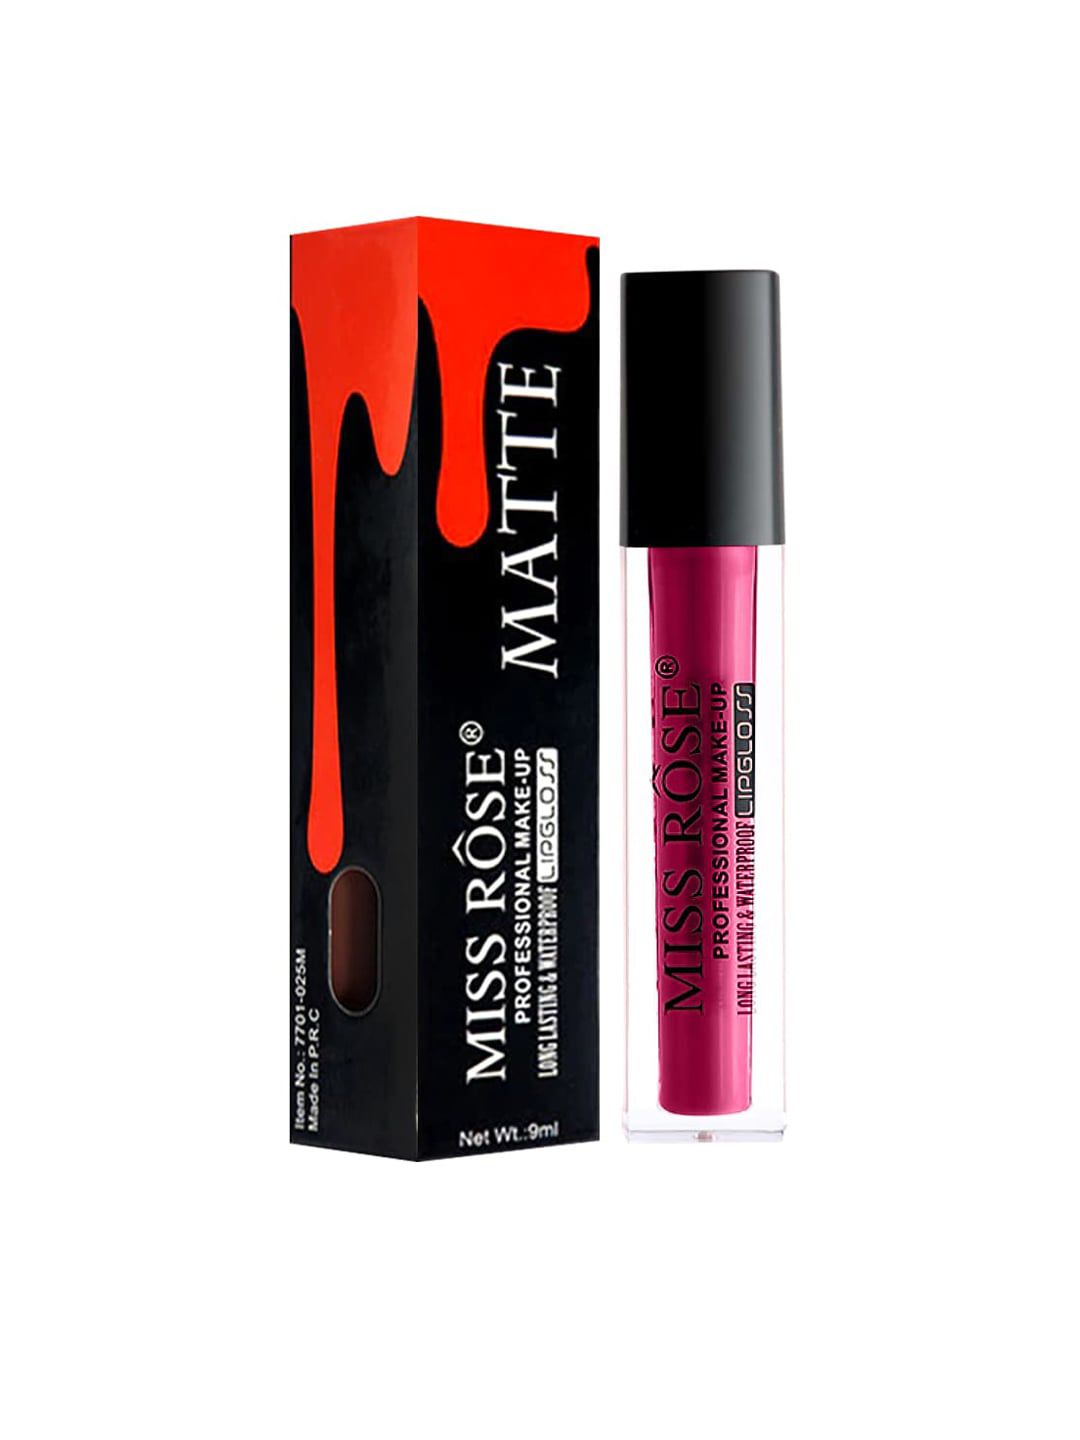 MISS ROSE Shiny Liquid LipGloss 7701-020 08 20 gm Price in India